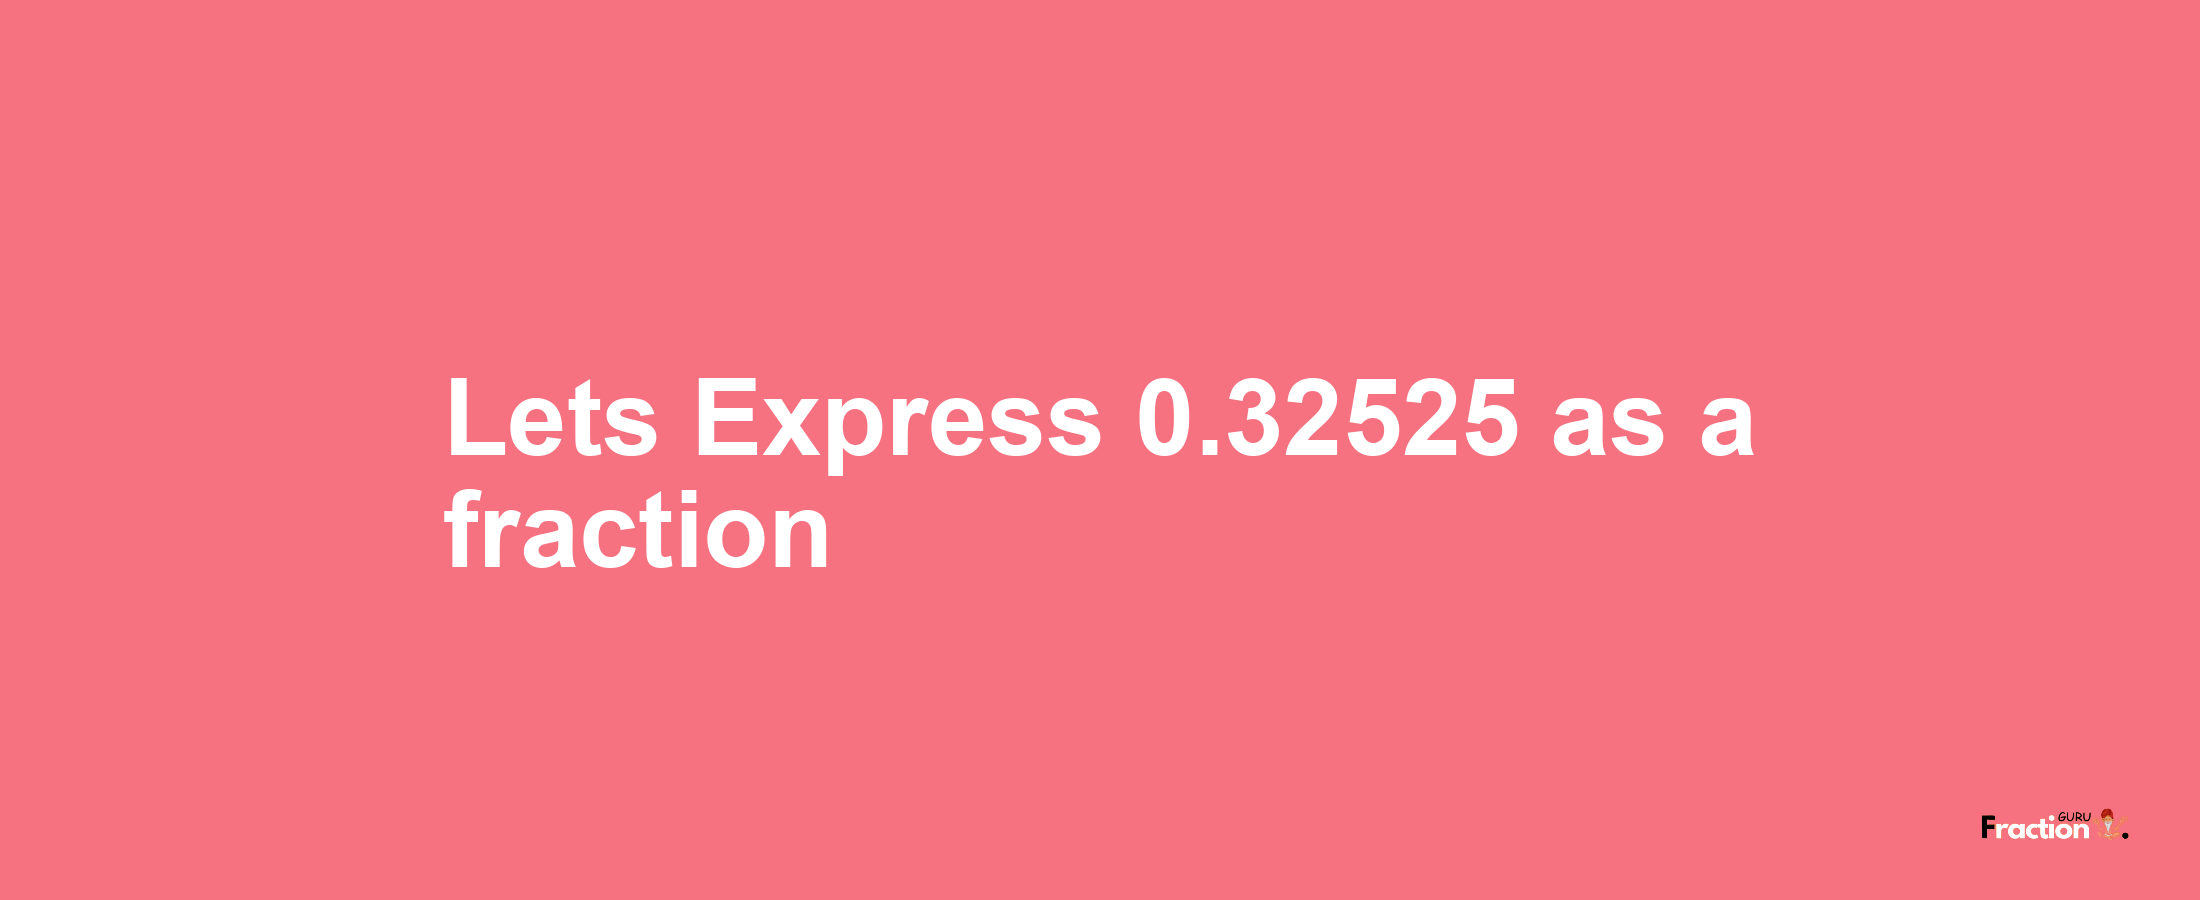 Lets Express 0.32525 as afraction